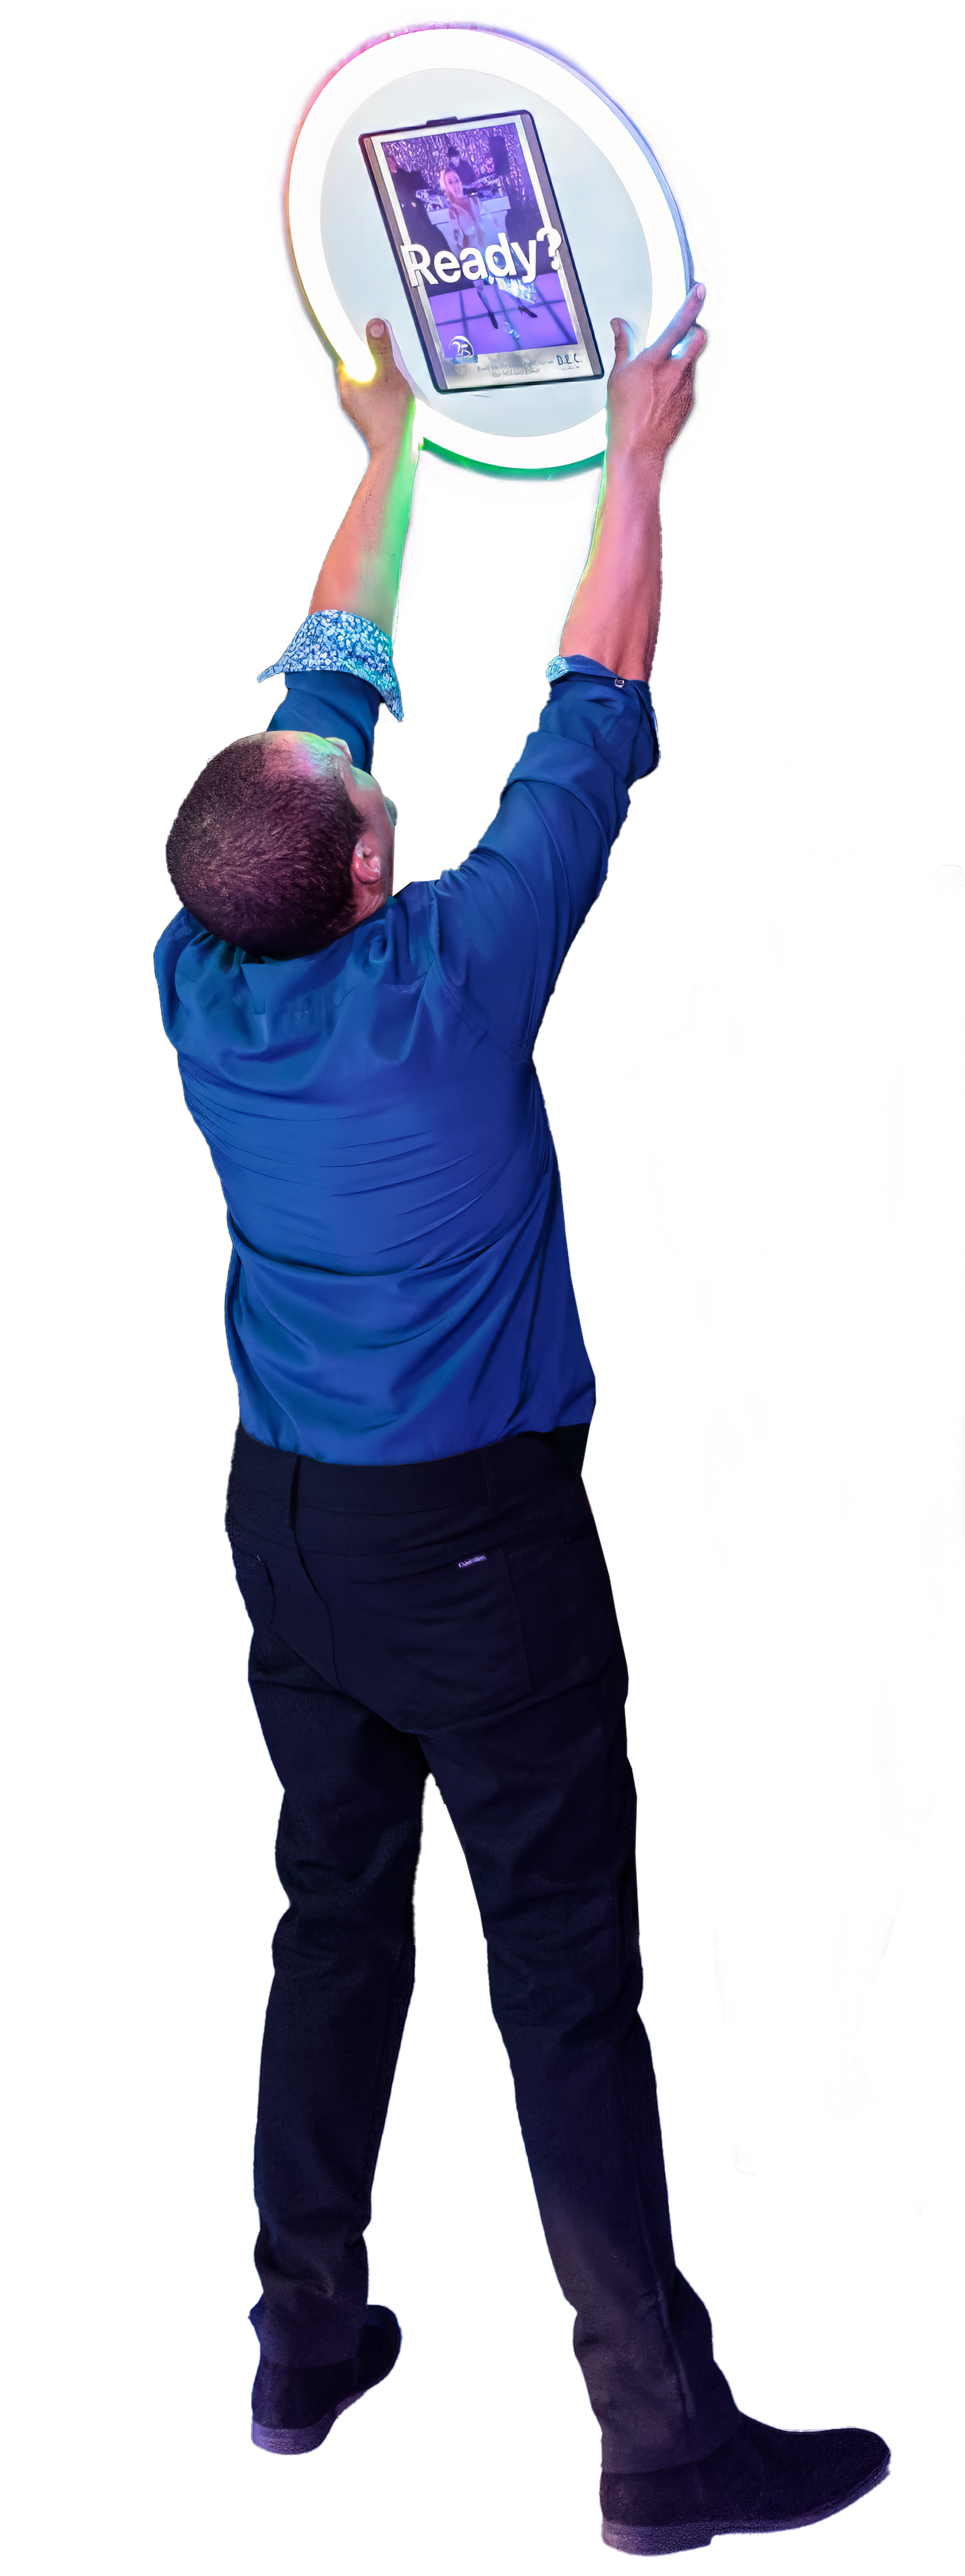 A man in a blue shirt is holding a soap bubble in his hands.